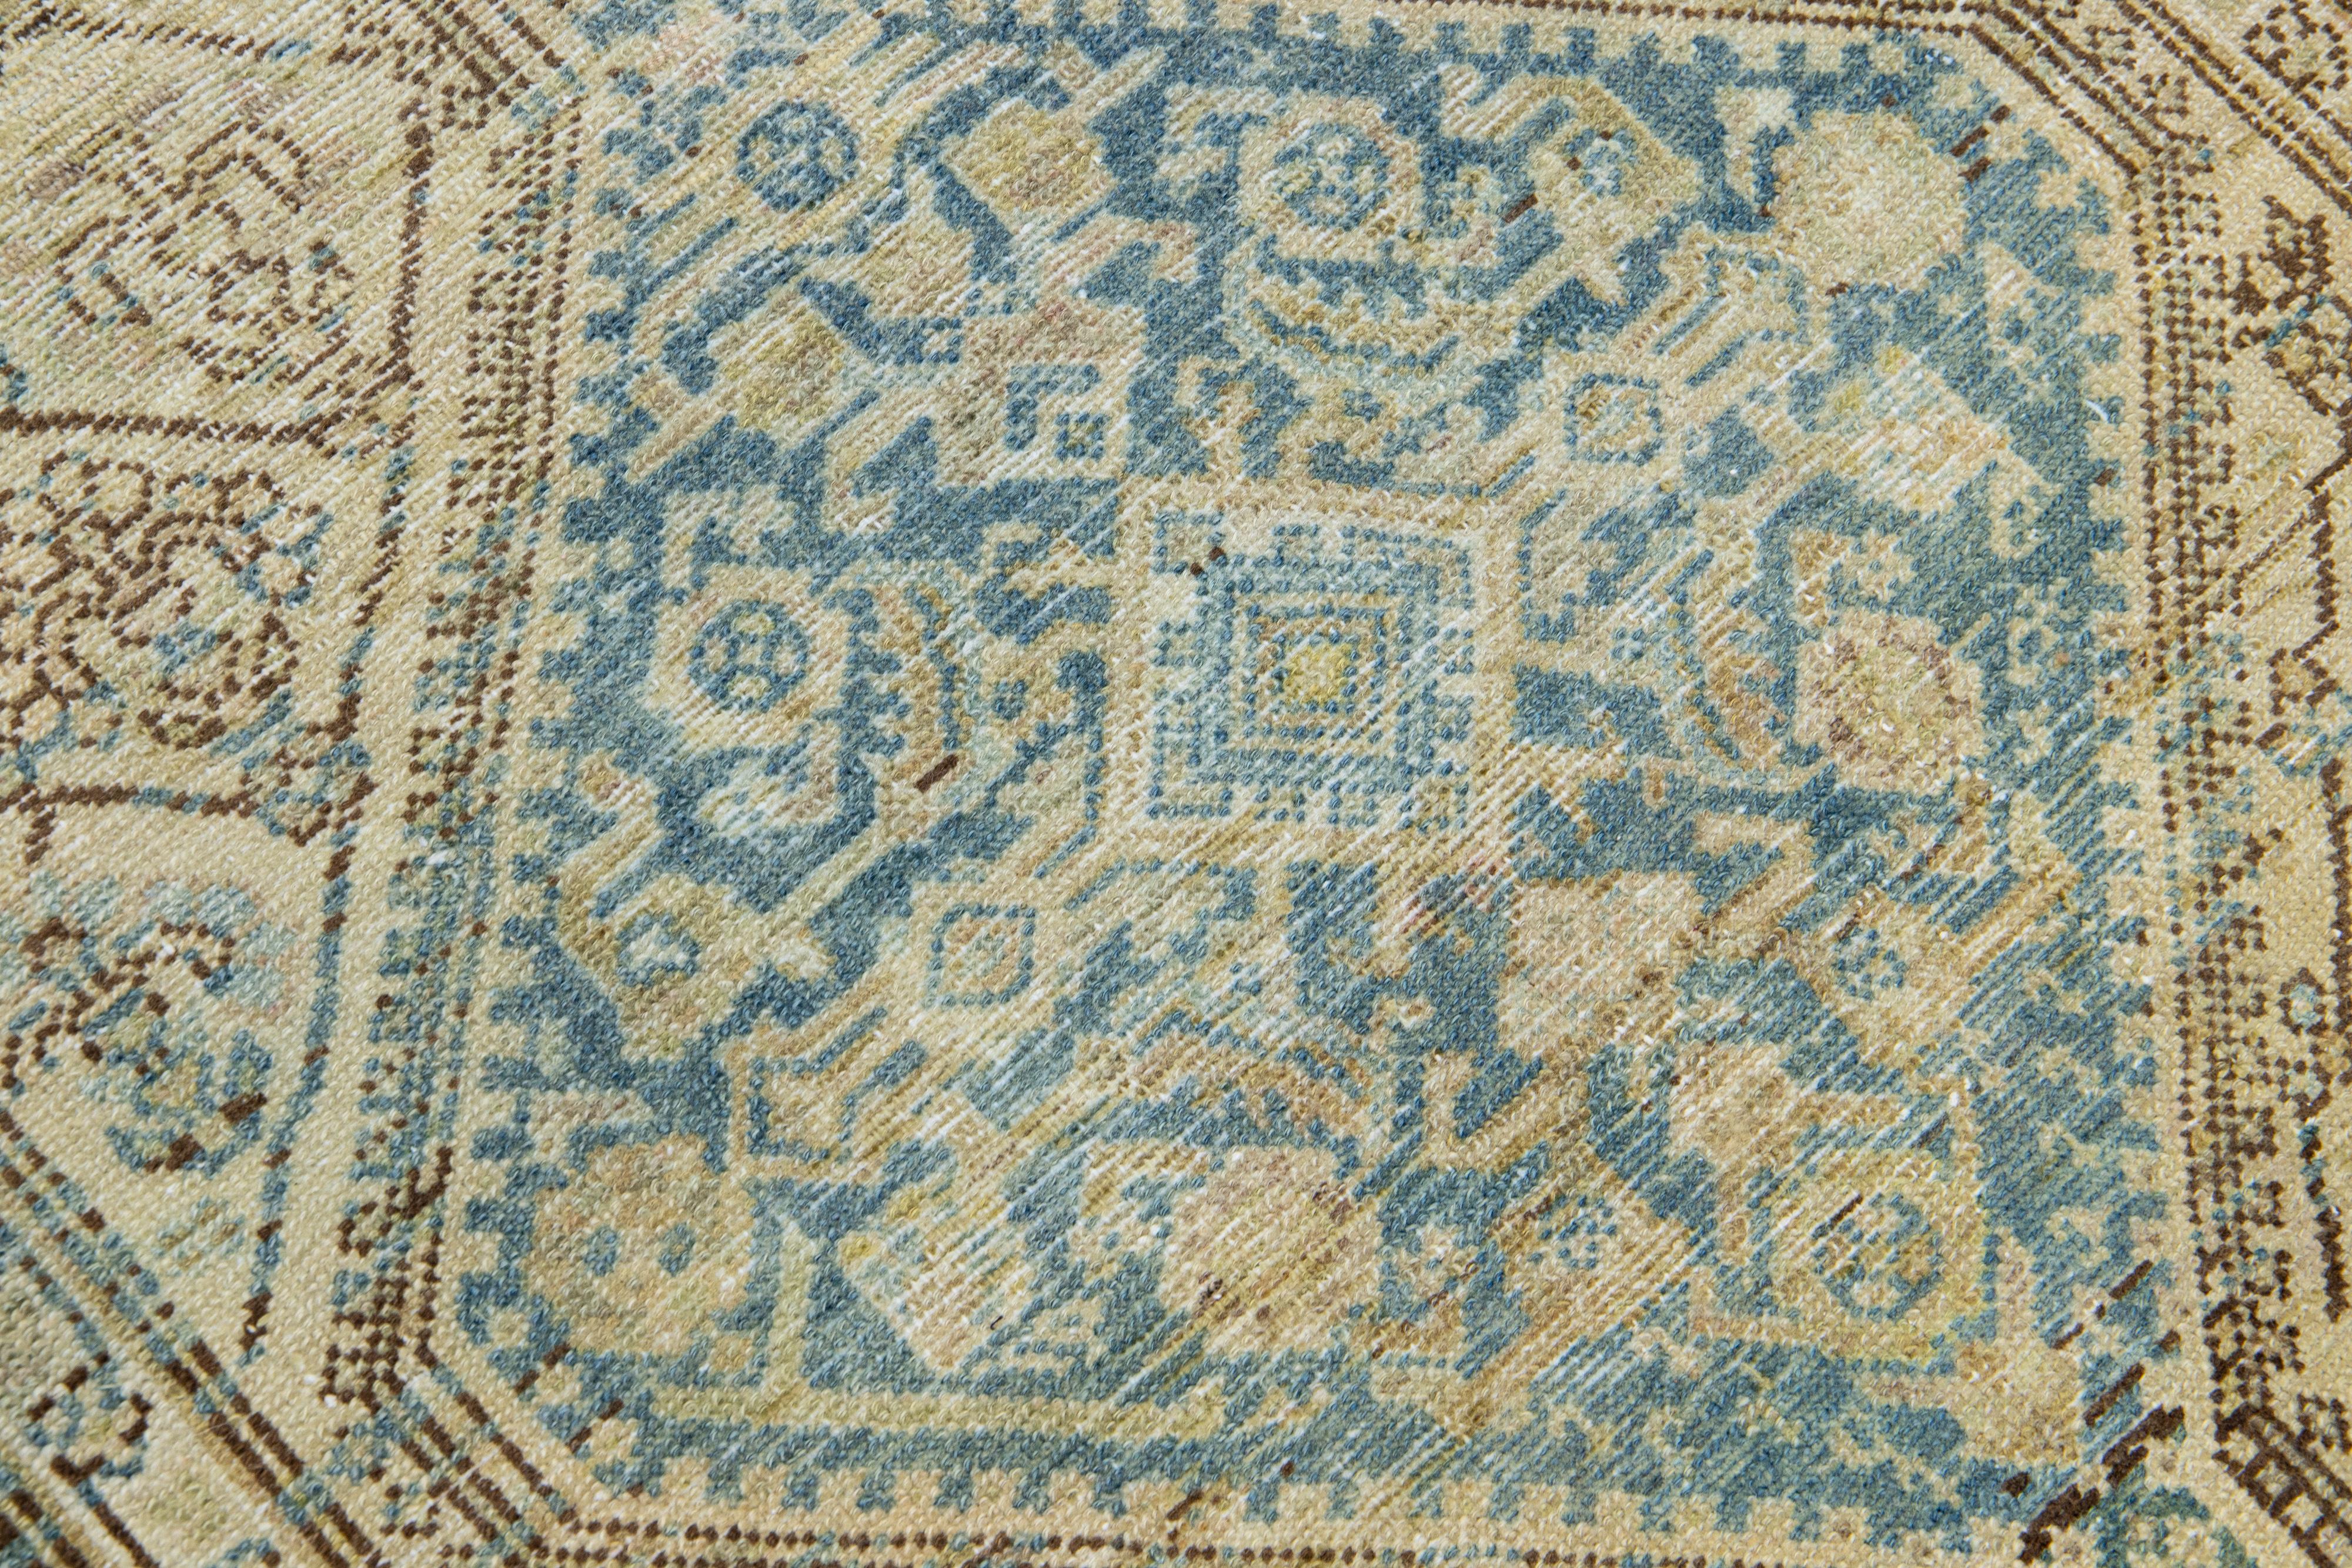 1920s Persian Malayer Wool Runner with Tribal Design In Blue For Sale 2